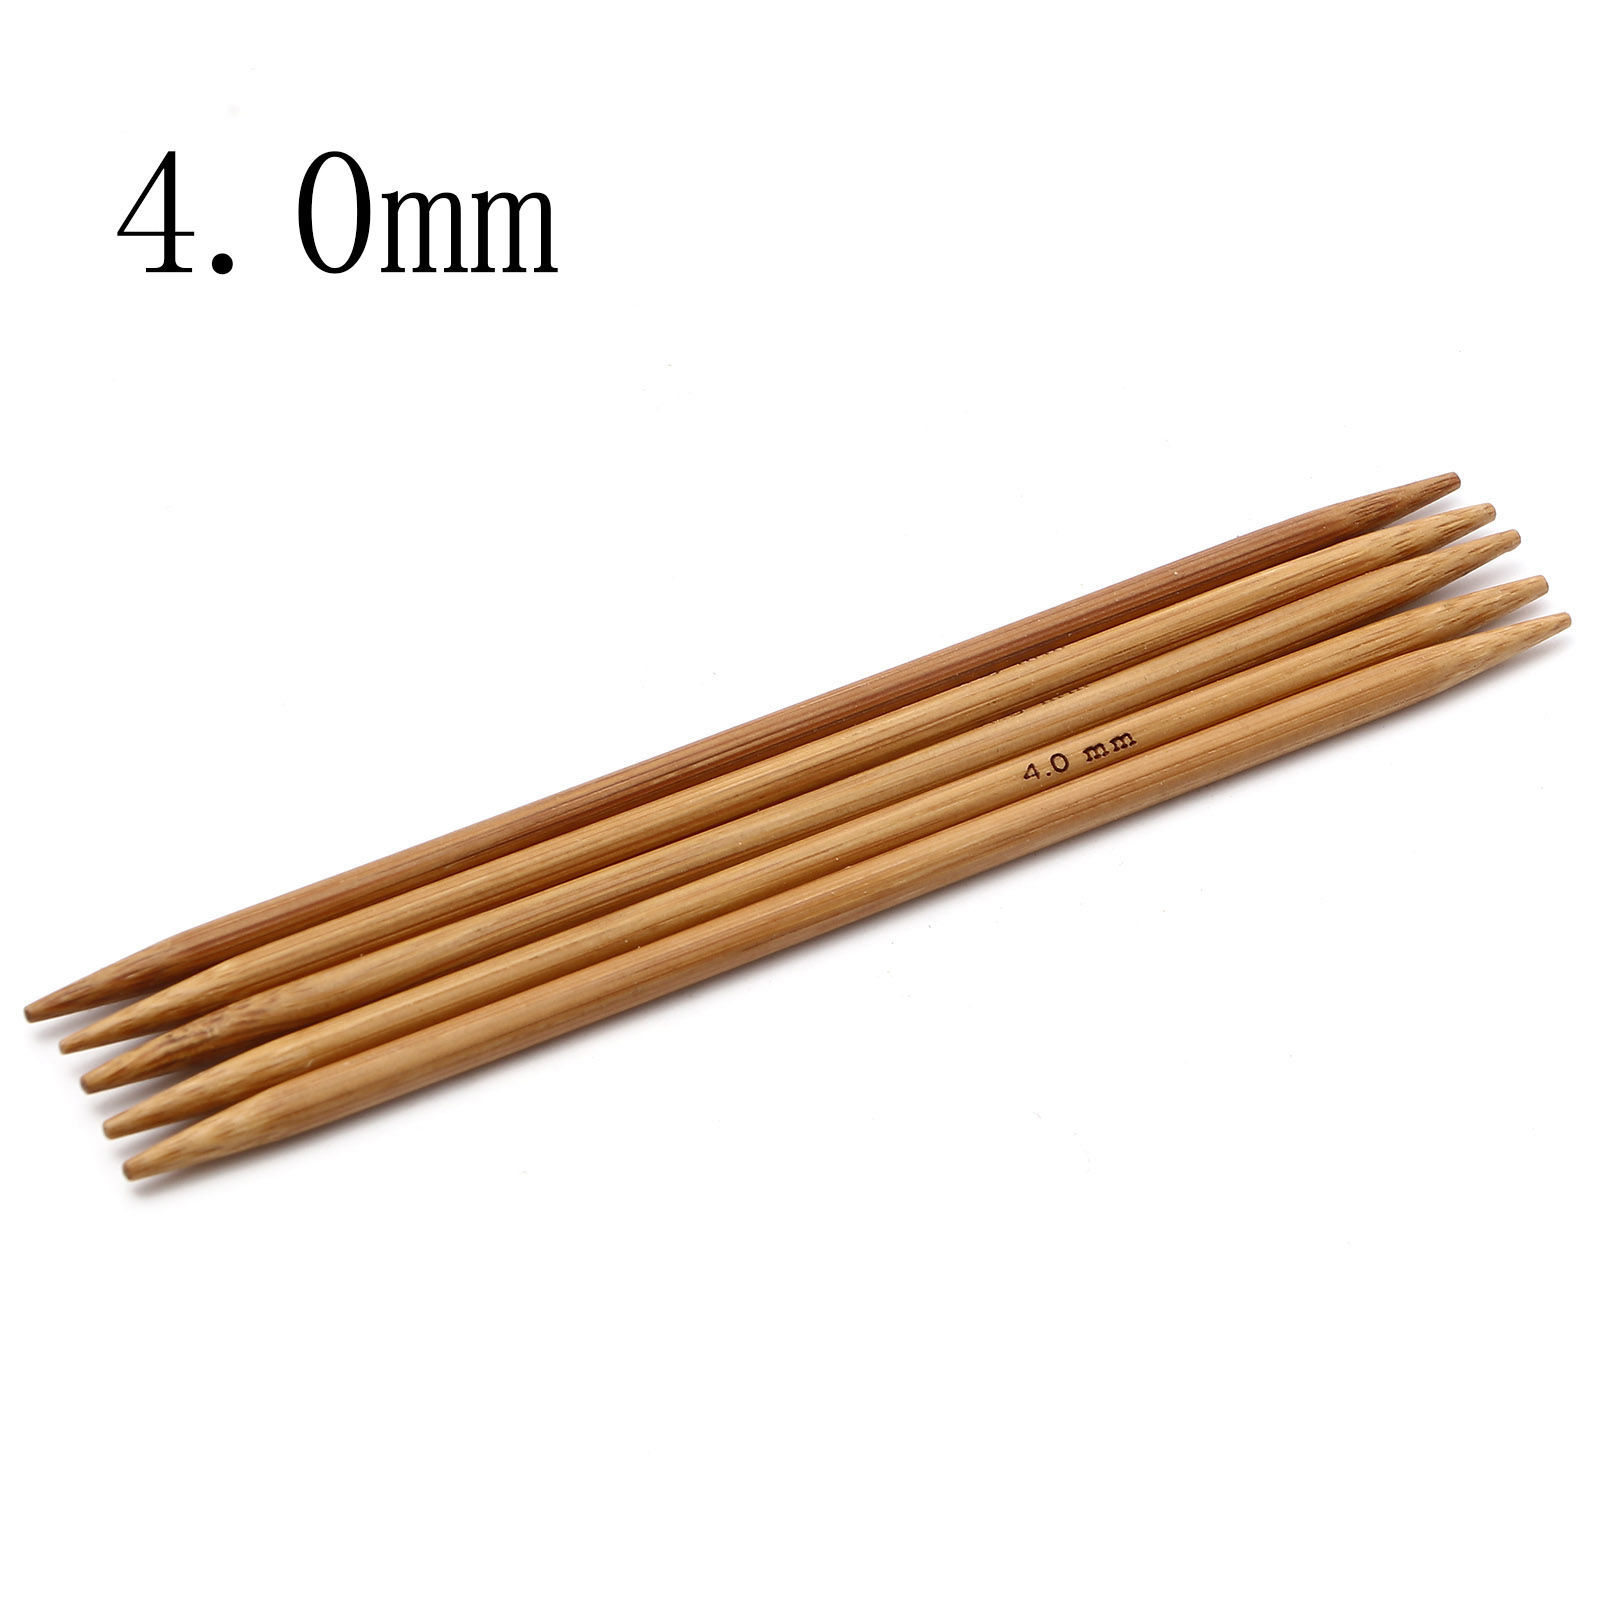 Picture of (US6 4.0mm) Bamboo Double Pointed Knitting Needles Brown 13cm(5 1/8") long, 5 PCs